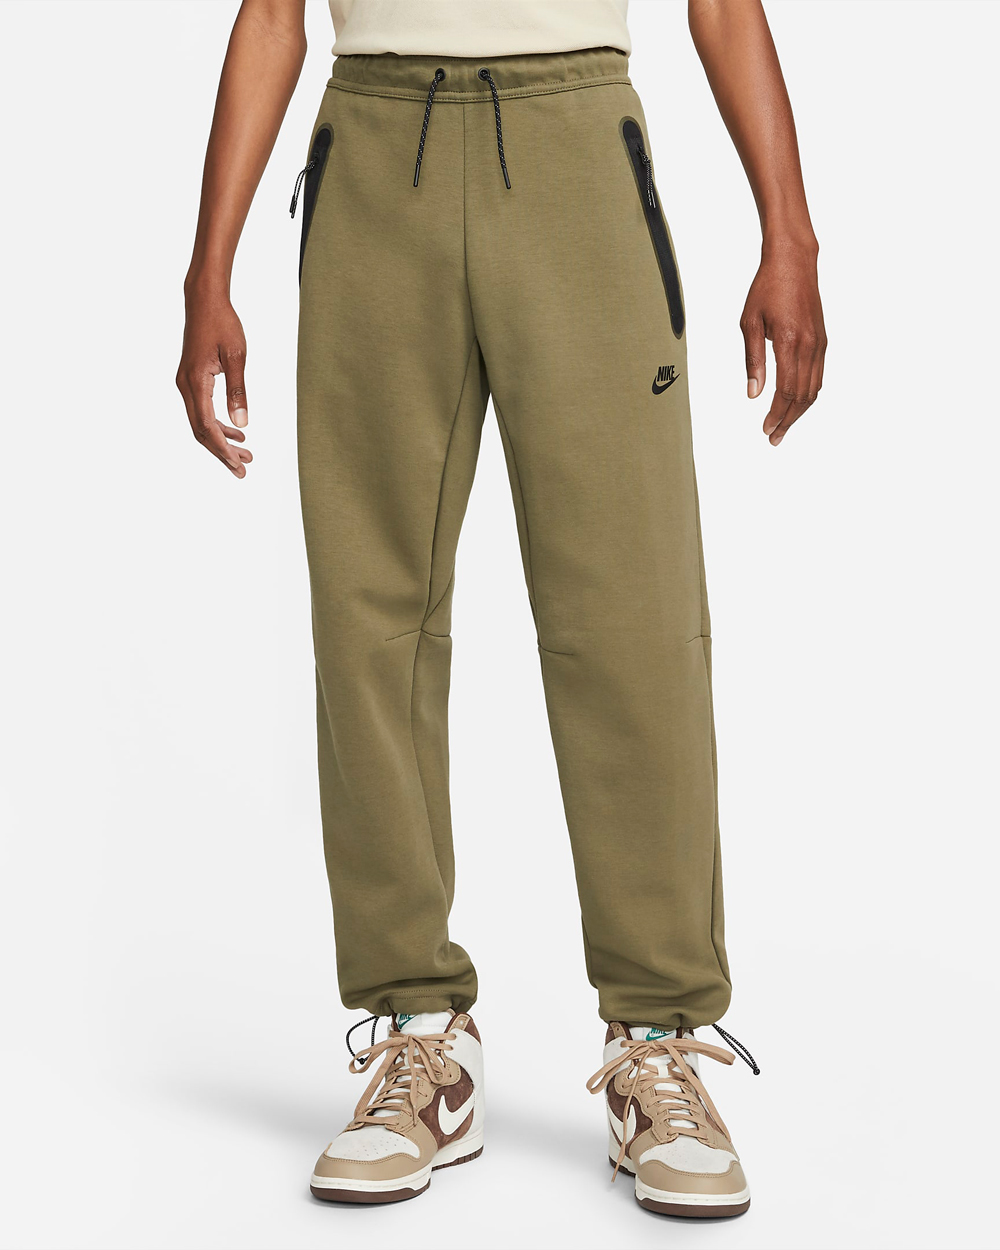 Where to Buy Nike Tech Fleece Clothing in Alligator Olive Green